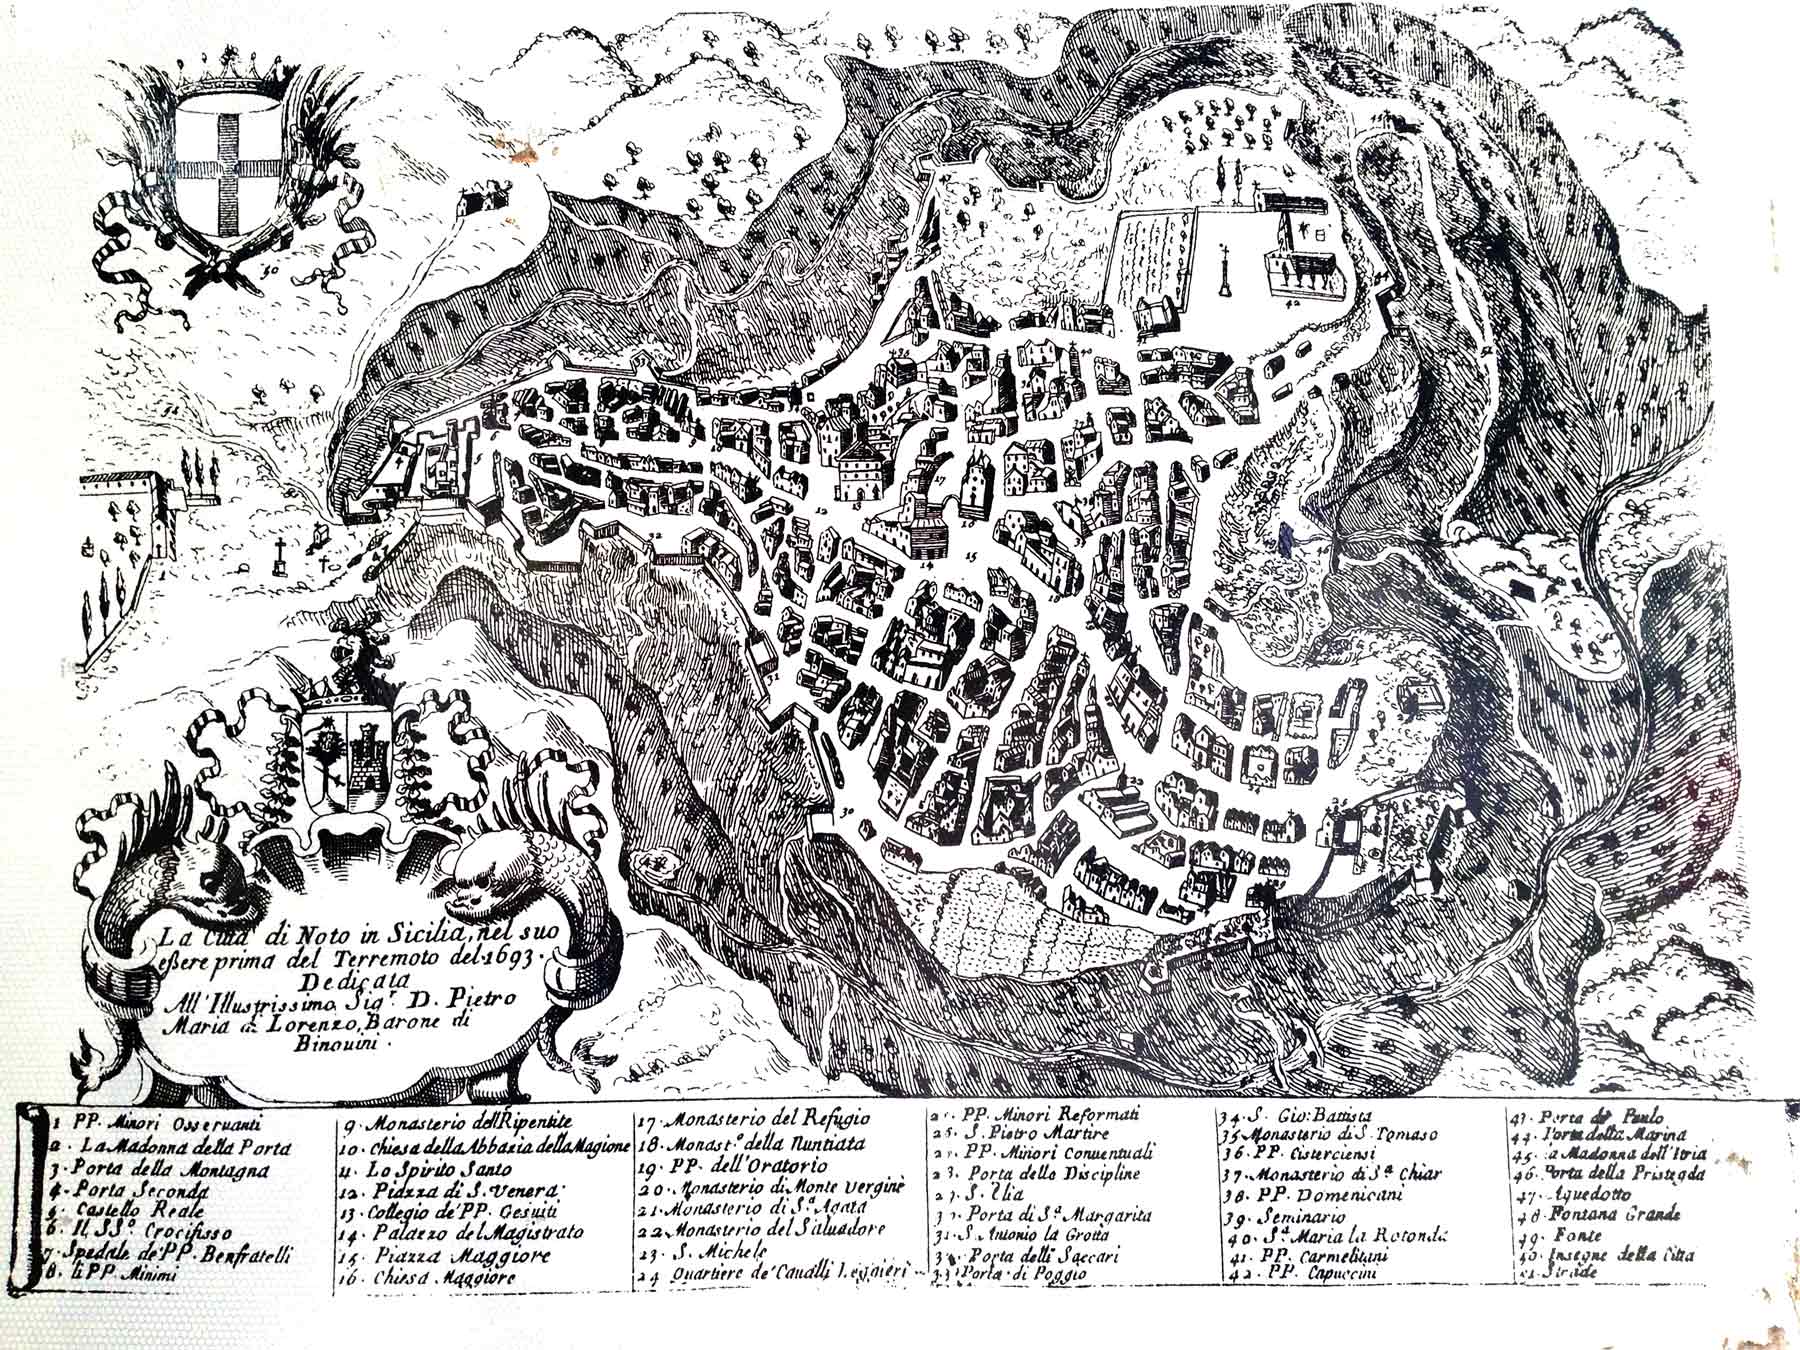 Map of Noto antica before the earthquake of 1693